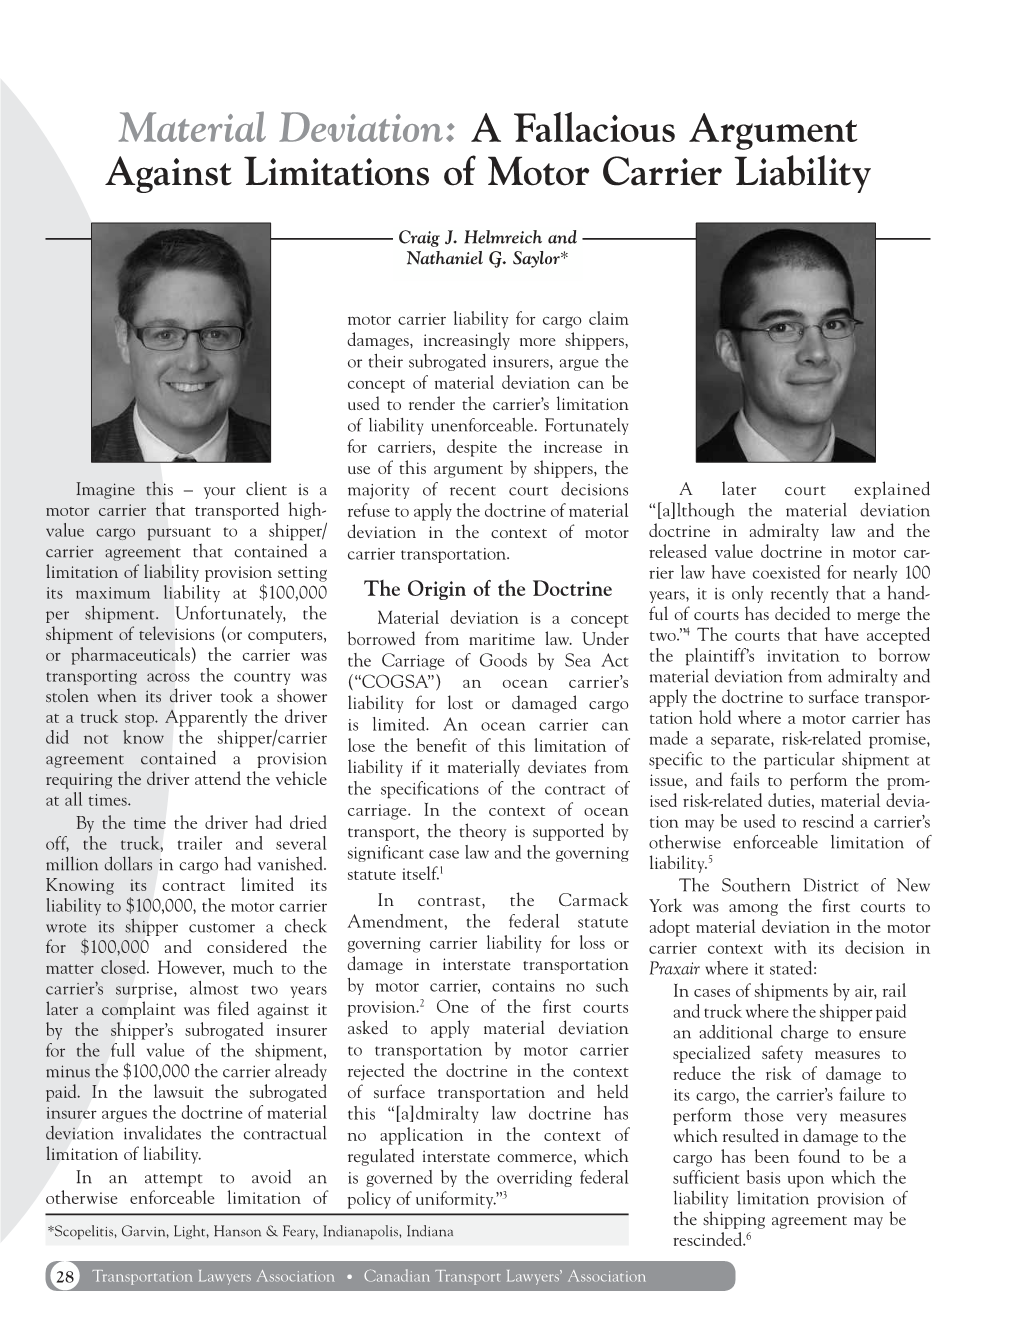 Material Deviation: a Fallacious Argument Against Limitations of Motor Carrier Liability